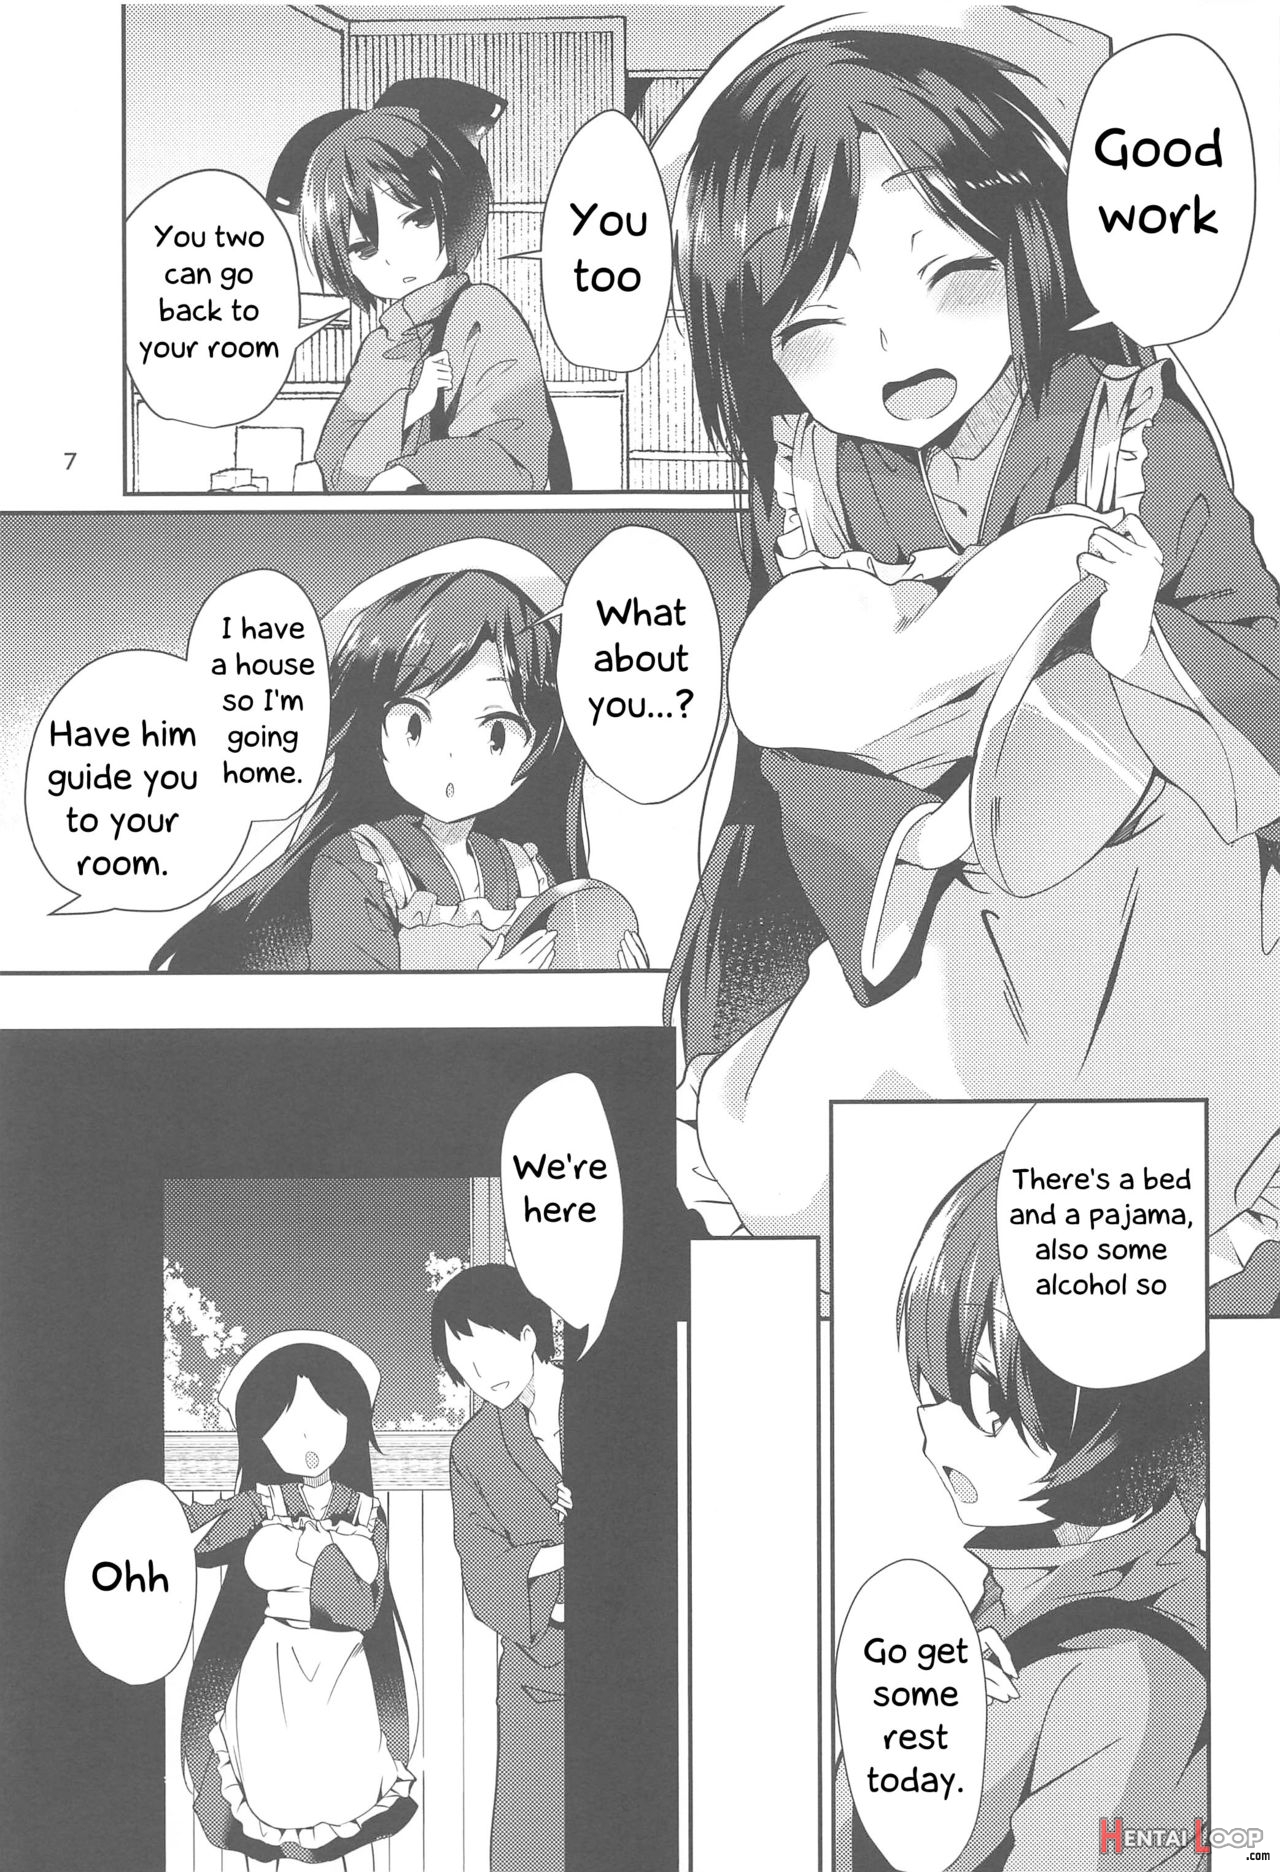 Kagerou's Human Exposure Record page 6